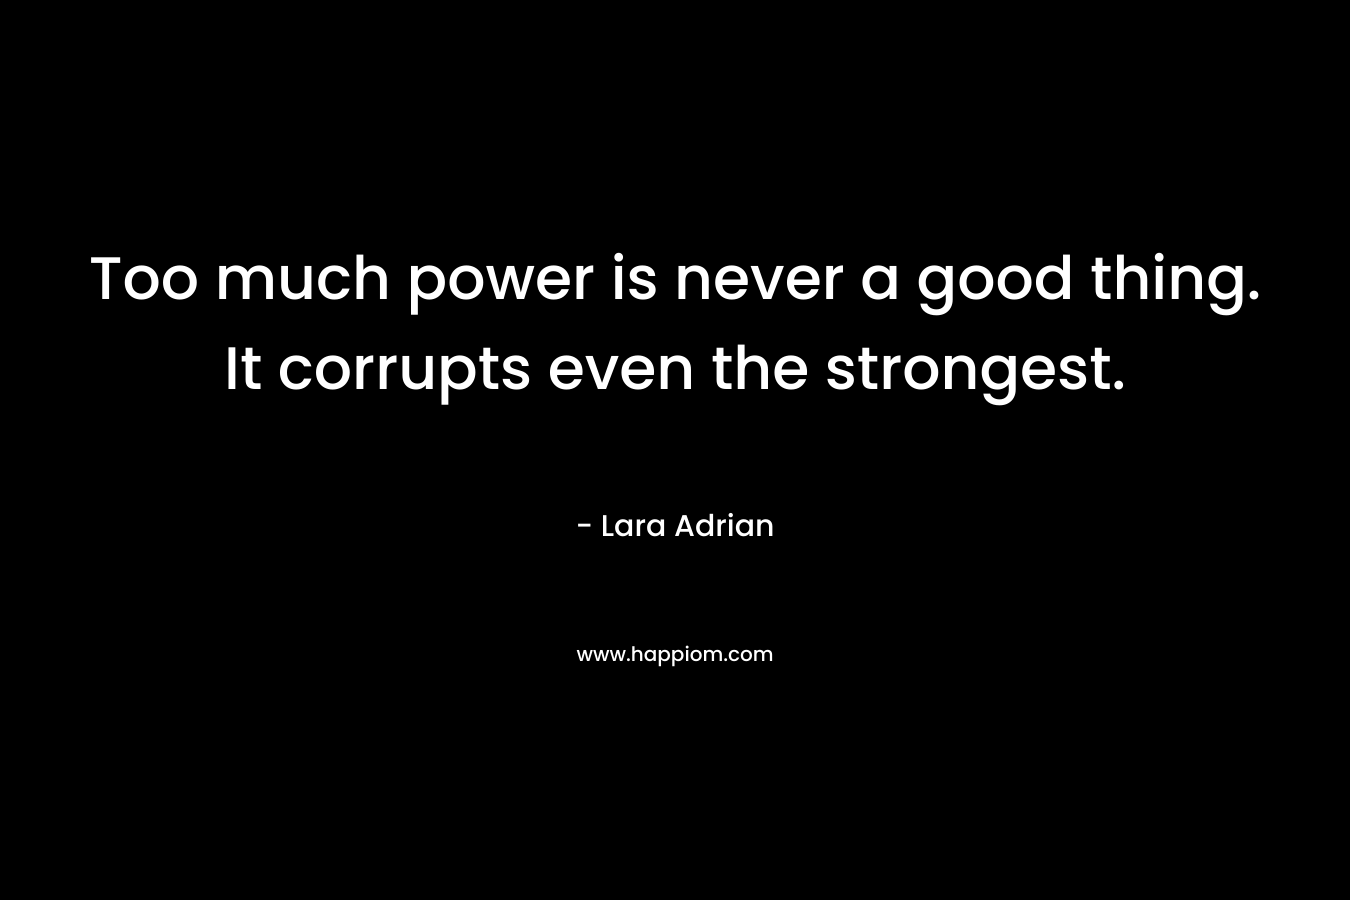 Too much power is never a good thing. It corrupts even the strongest.